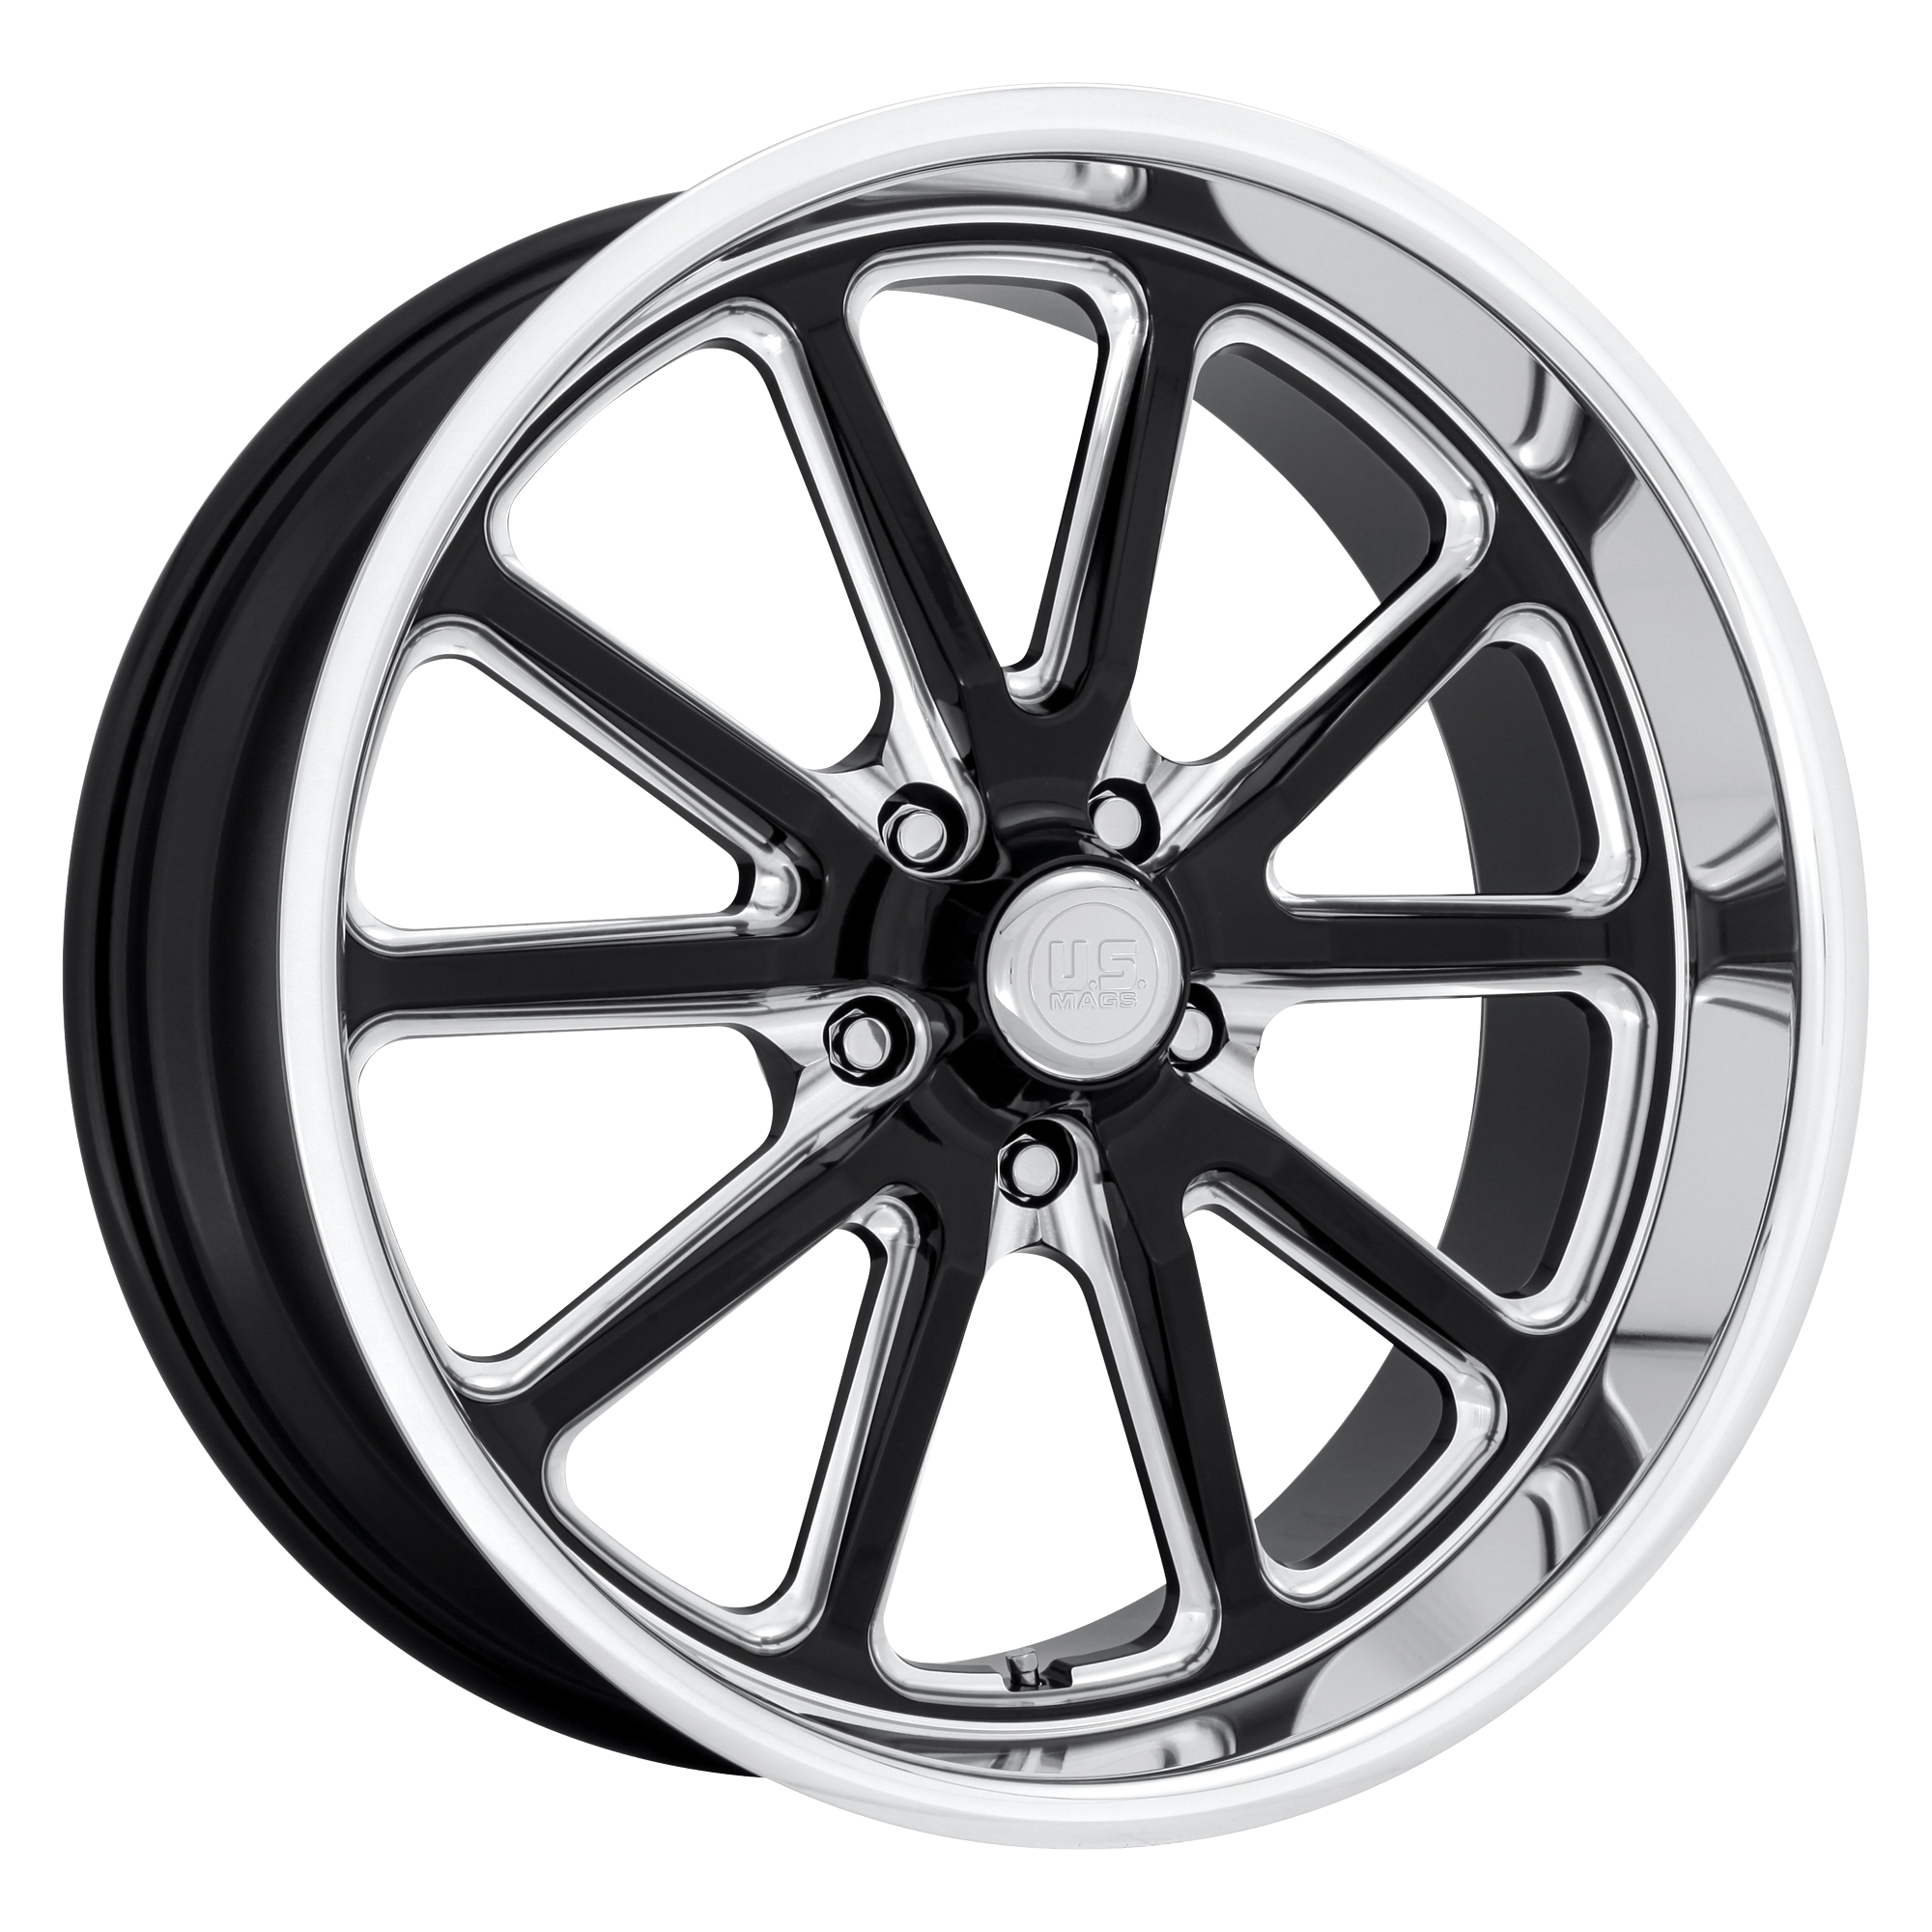 RAMBLER 17x7 5x120.65 GLOSS BLACK MILLED (1 mm) - Tires and Engine Performance